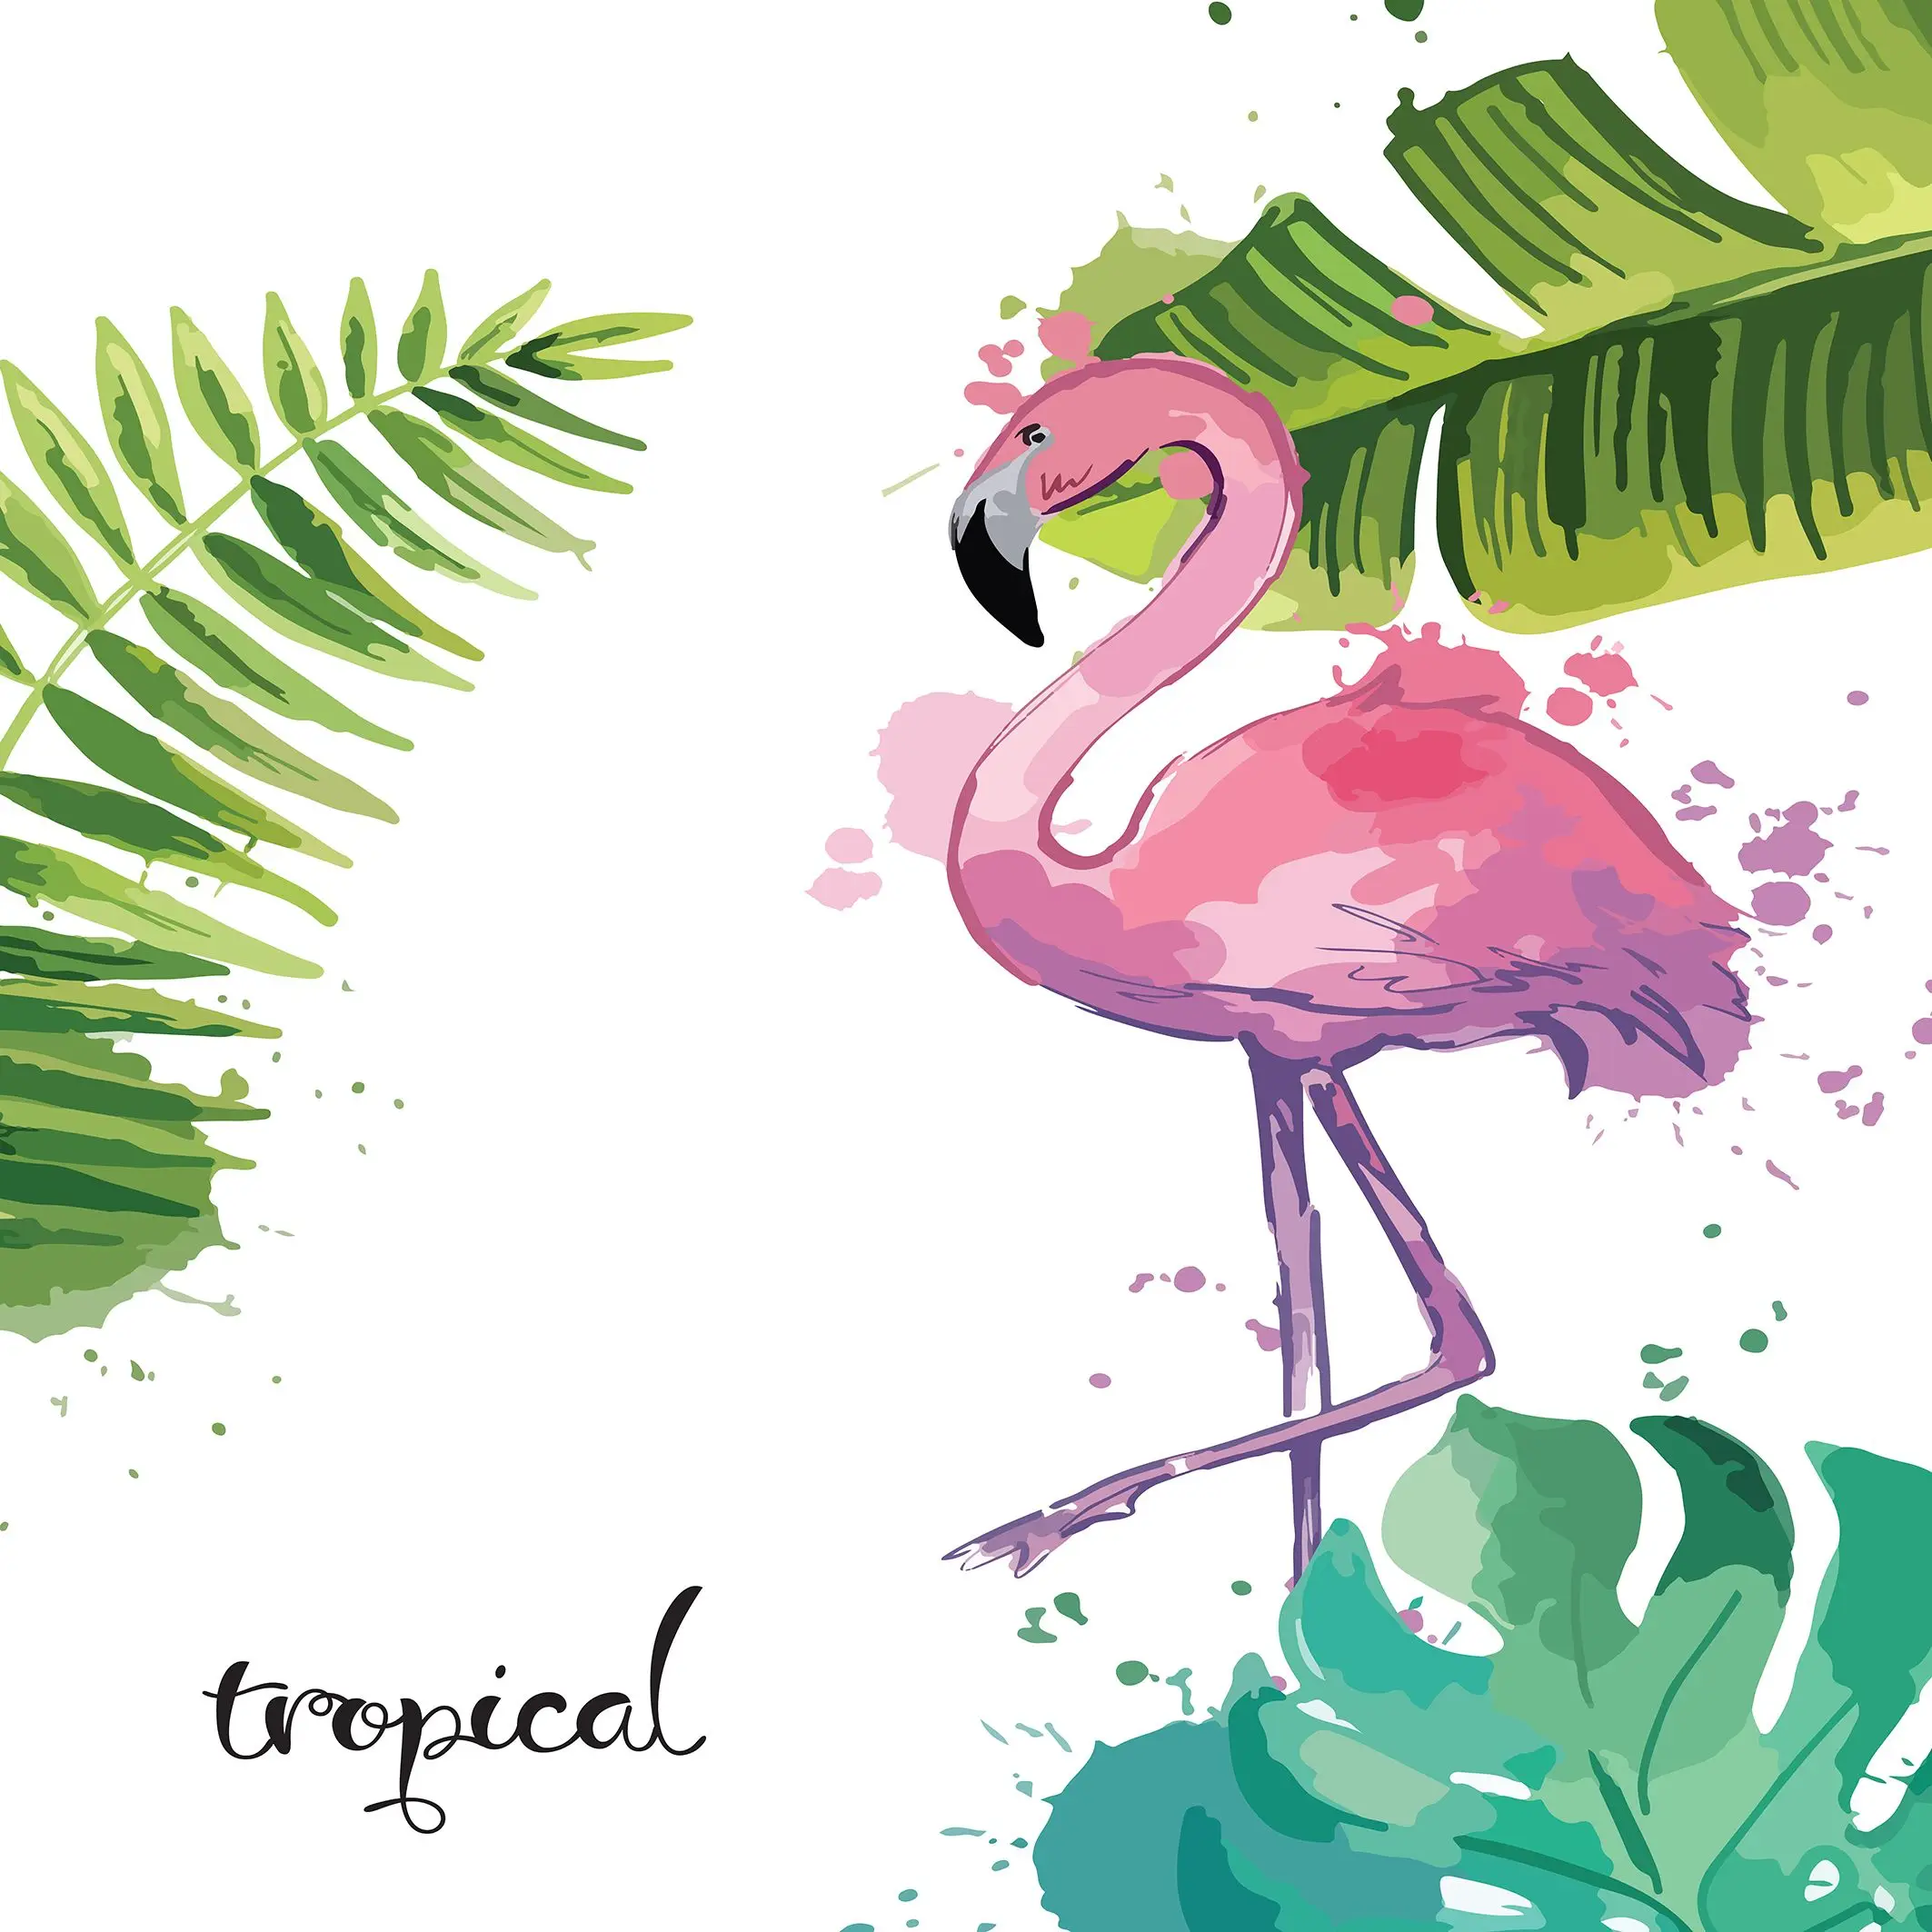 

Curtain Tropical Leaves and Flamingo Exotic Forest Wild Nature Summer Holiday Watercolor Artwork Printed Pink Green